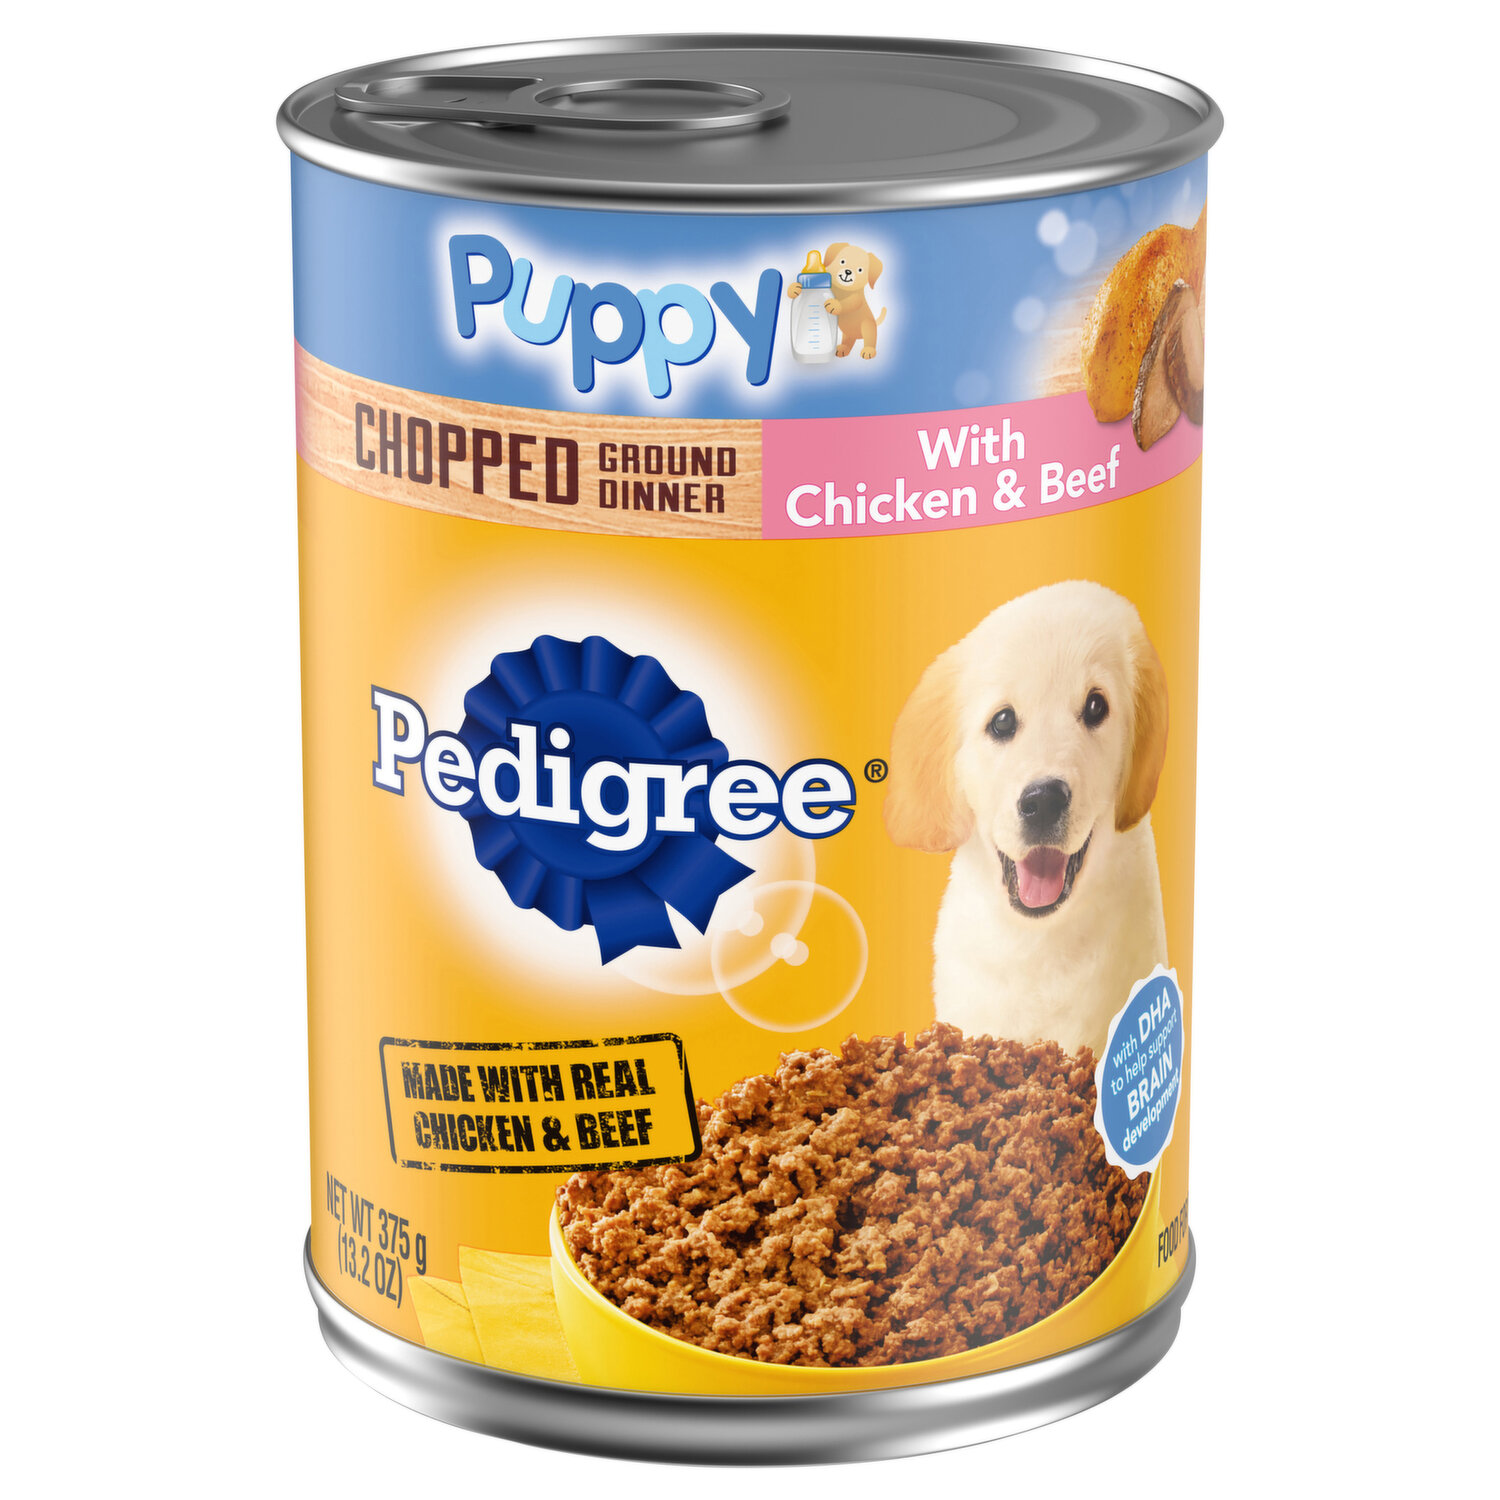 Are There Any Recalls On Pedigree Dog Food